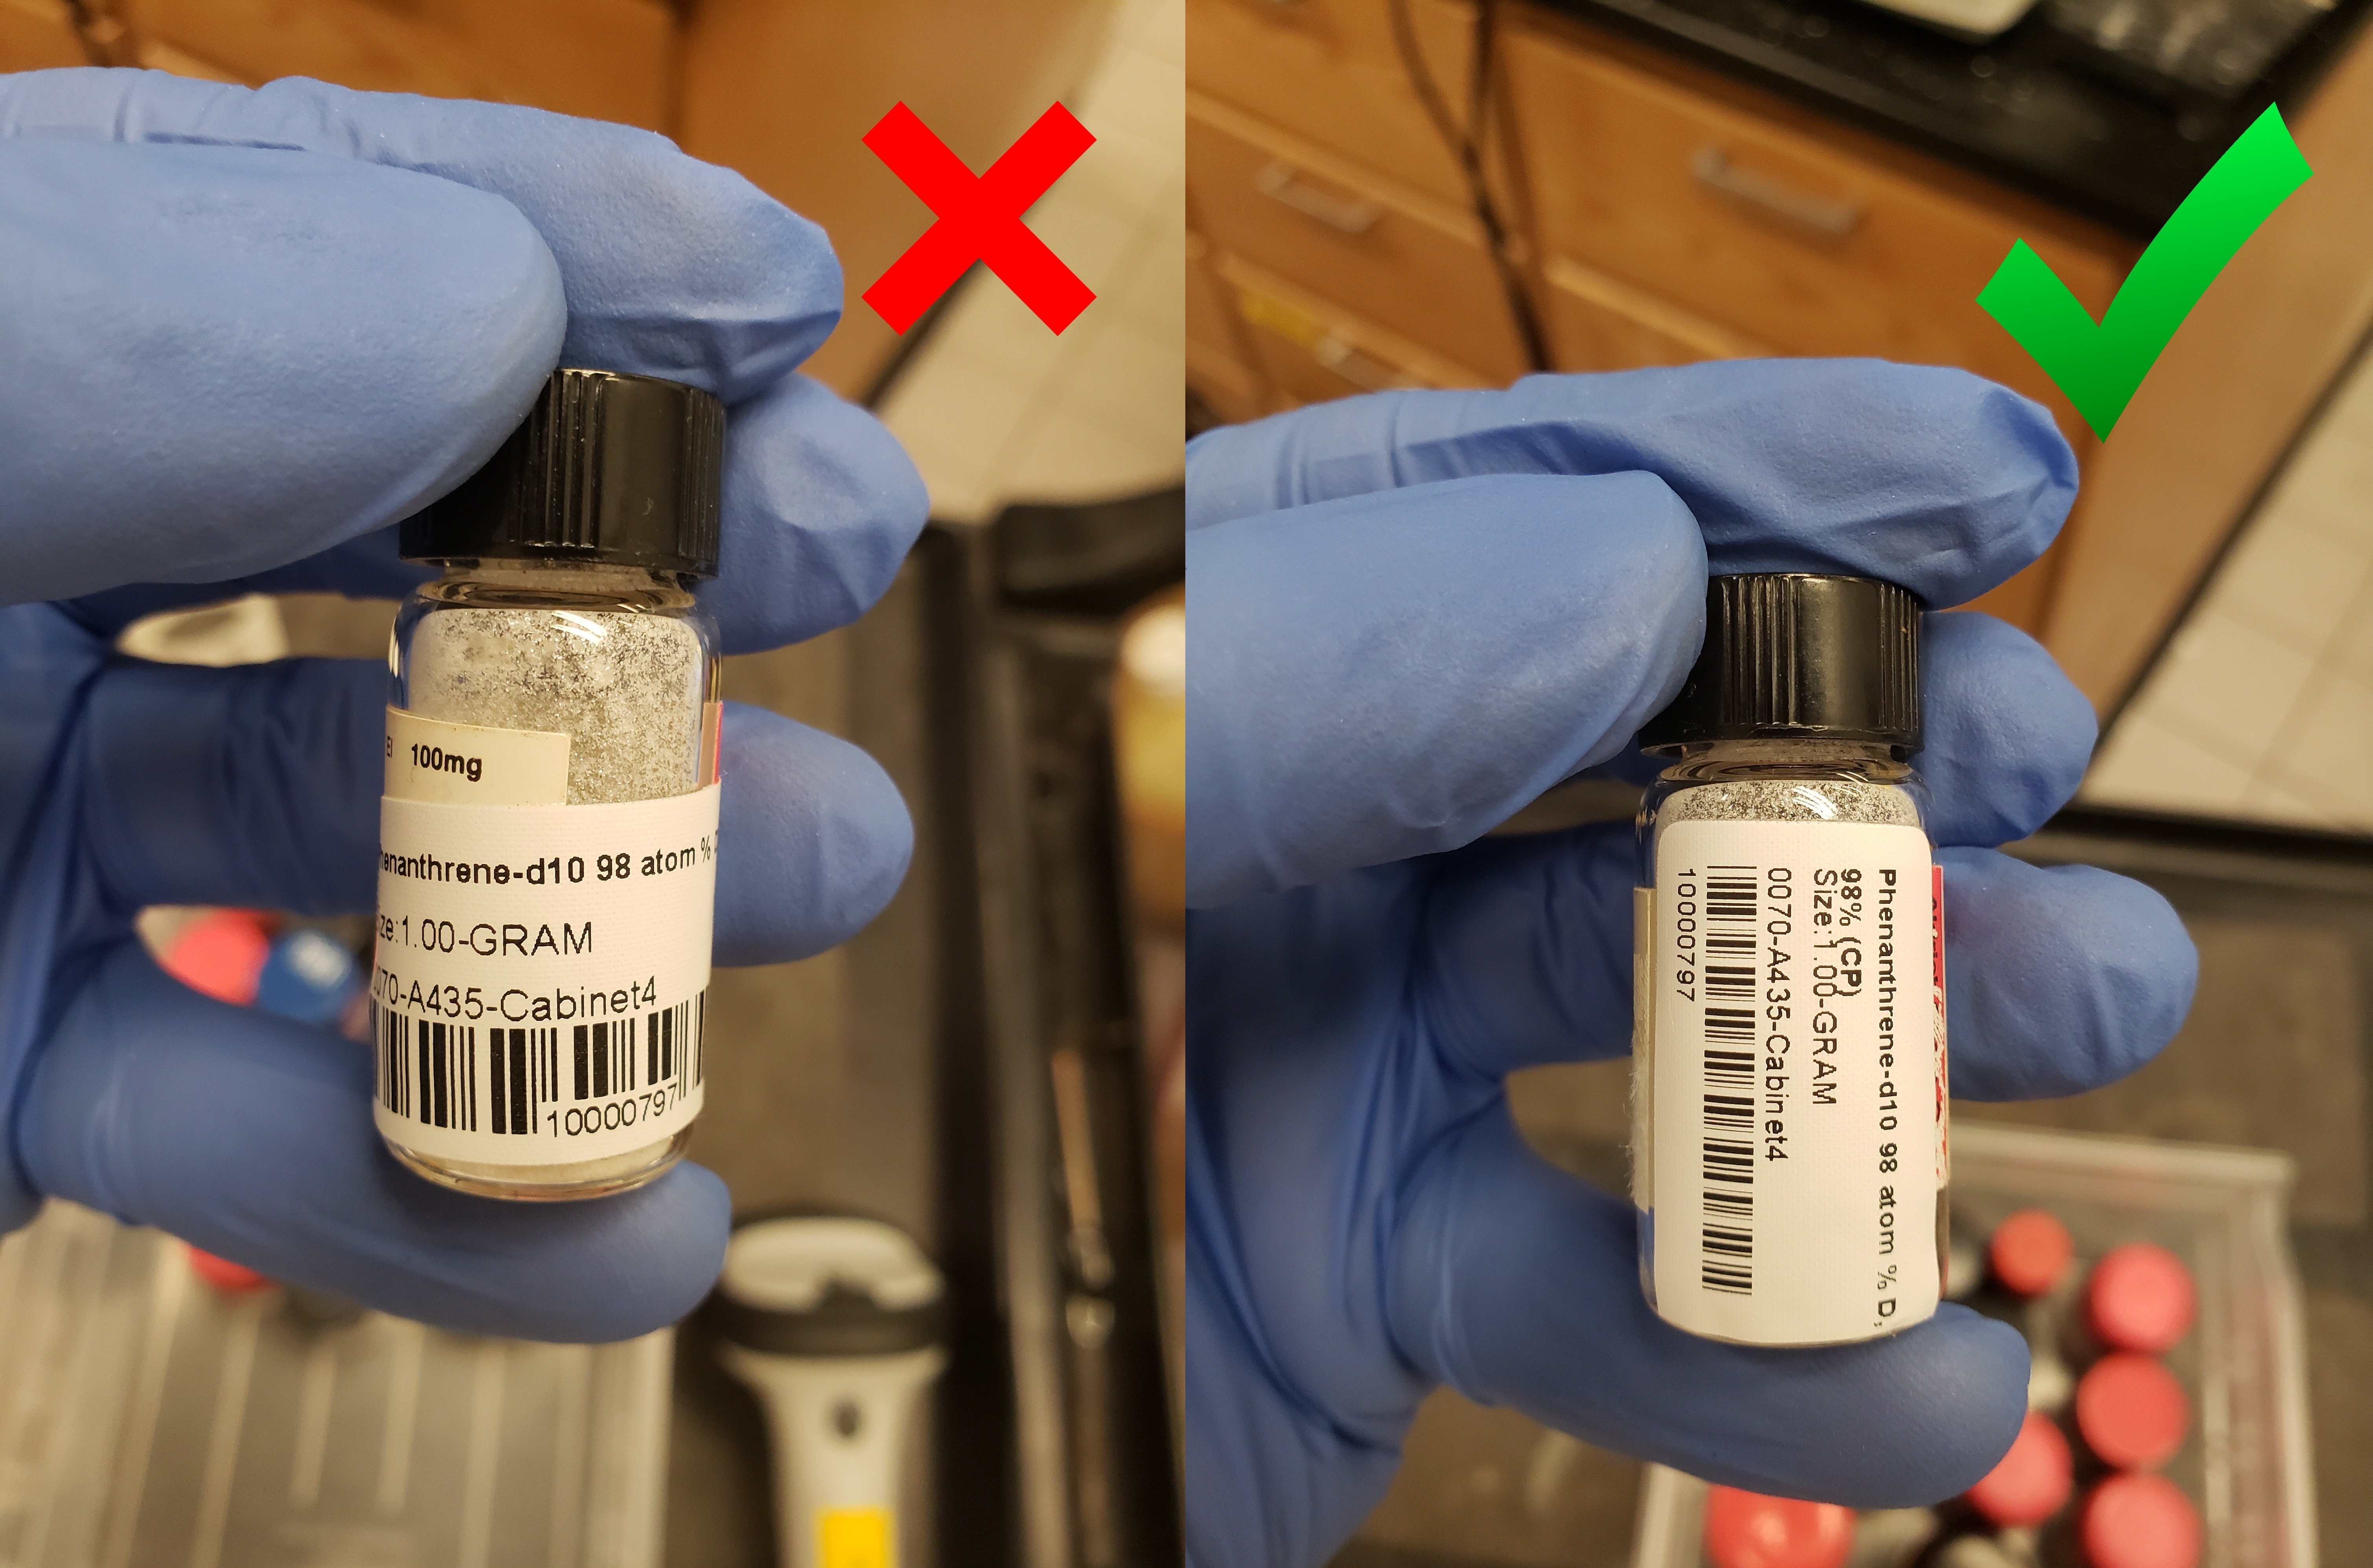 Picture Showing Right and Wrong Barcode Orientation for Small Vials